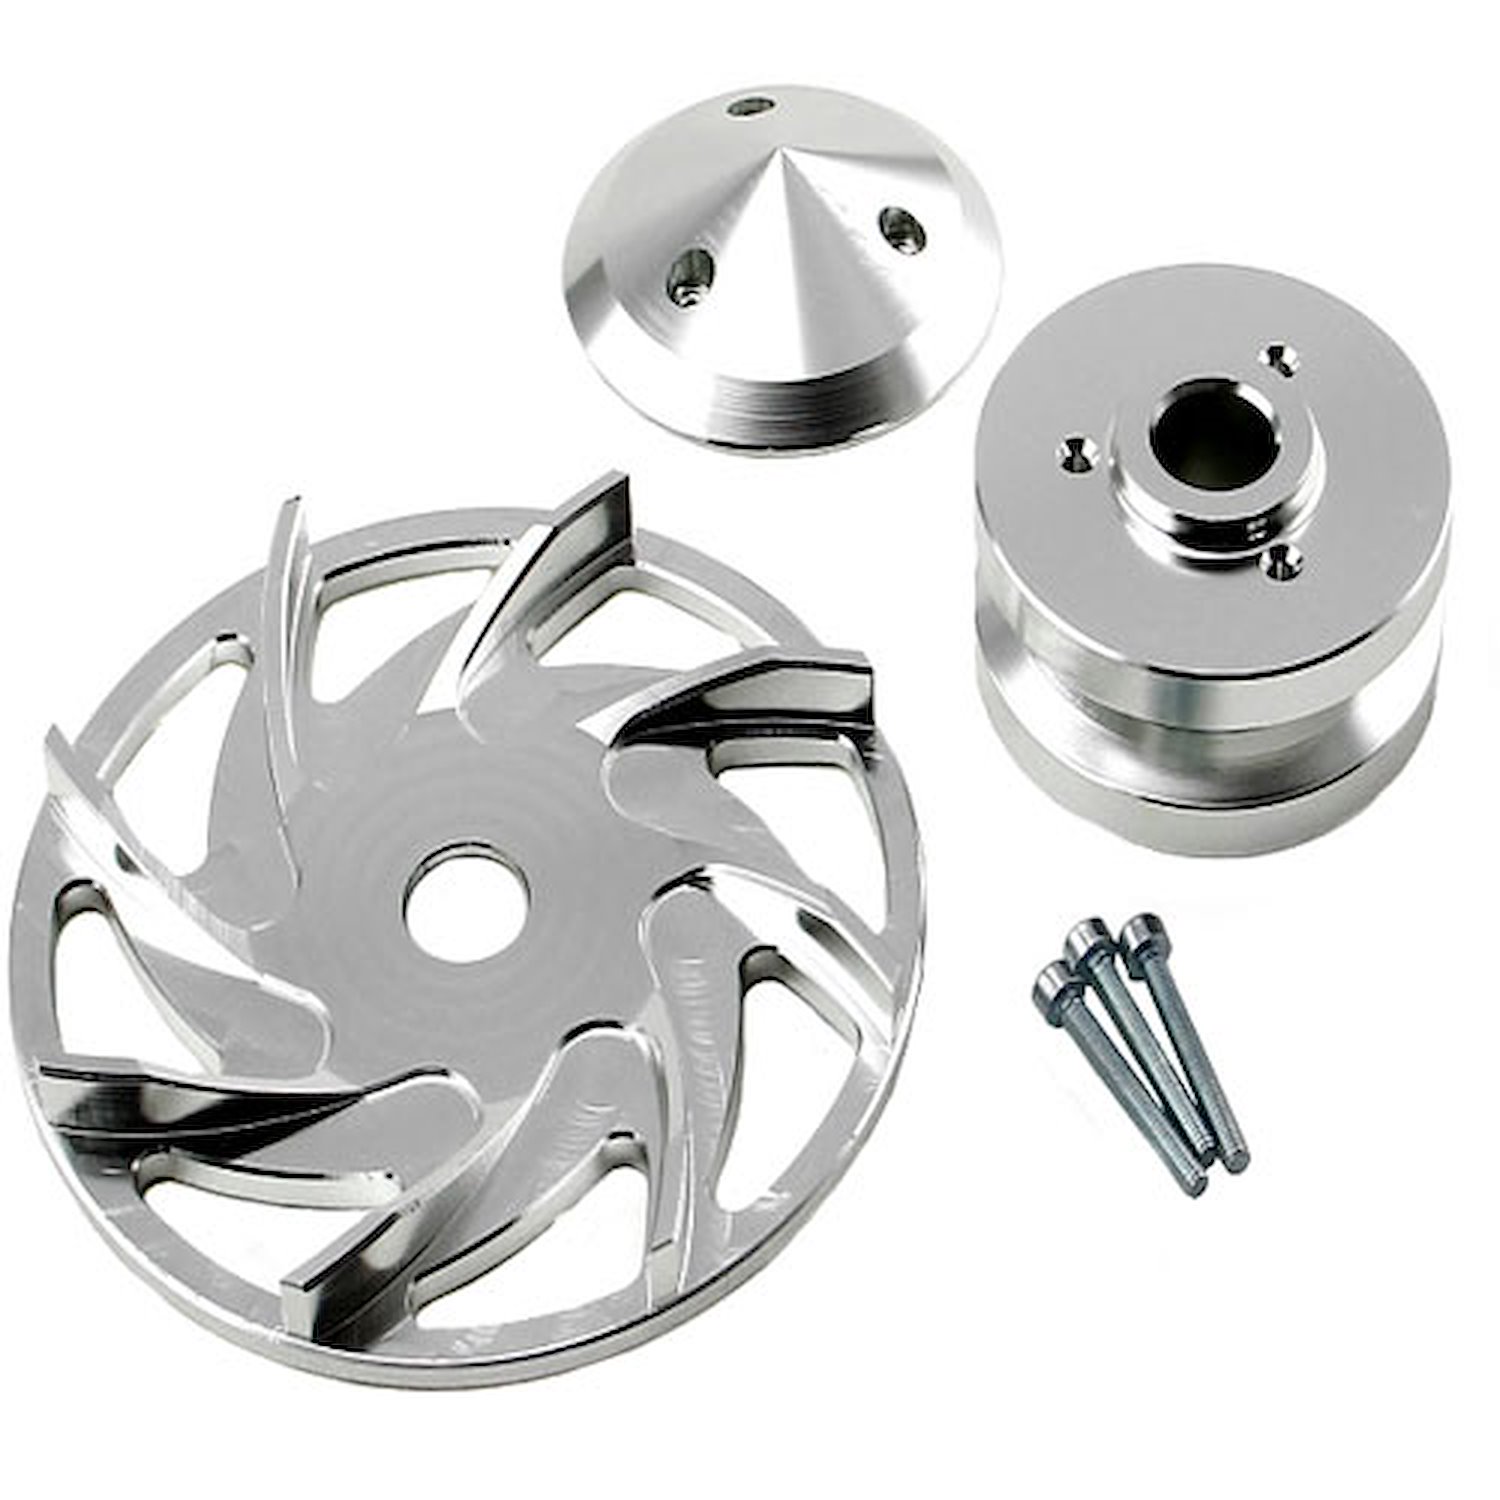 Universal Chevy Ford Single V Groove Silver Billet Alternator Pulley and Fan Kit